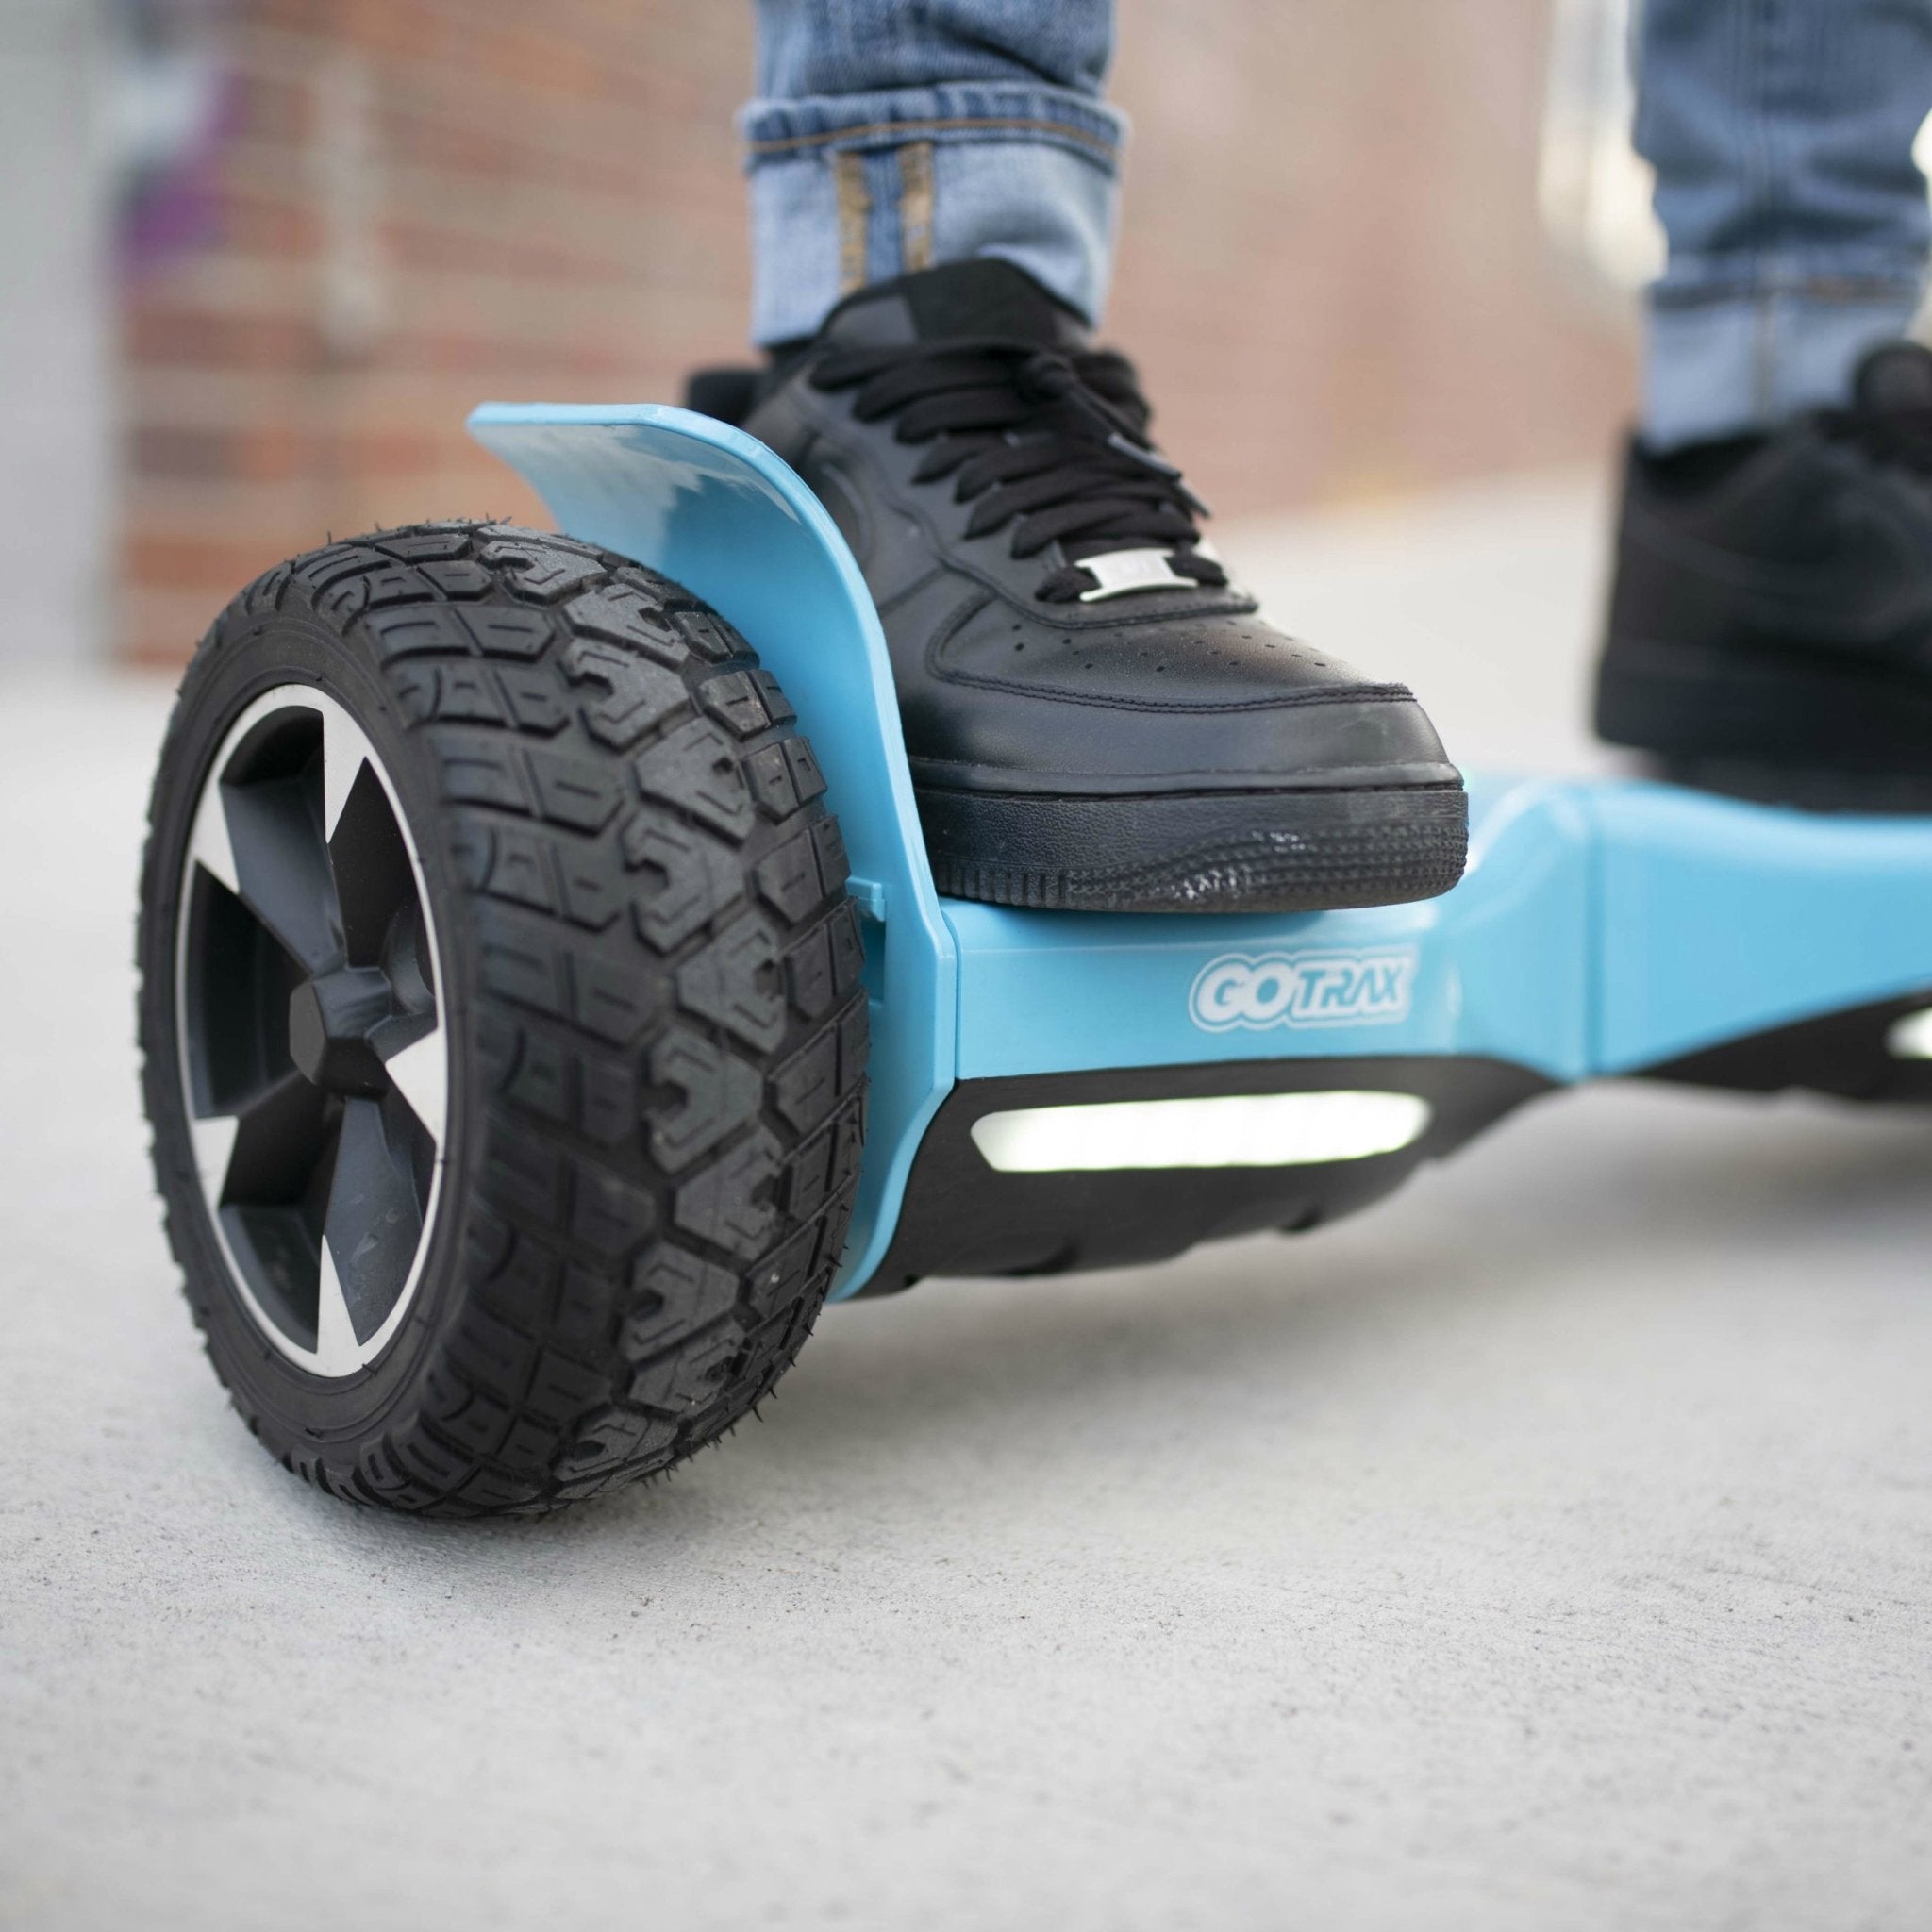 12 Exciting Reasons Why You Should Get An All-Terrain Hoverboard - GOTRAX